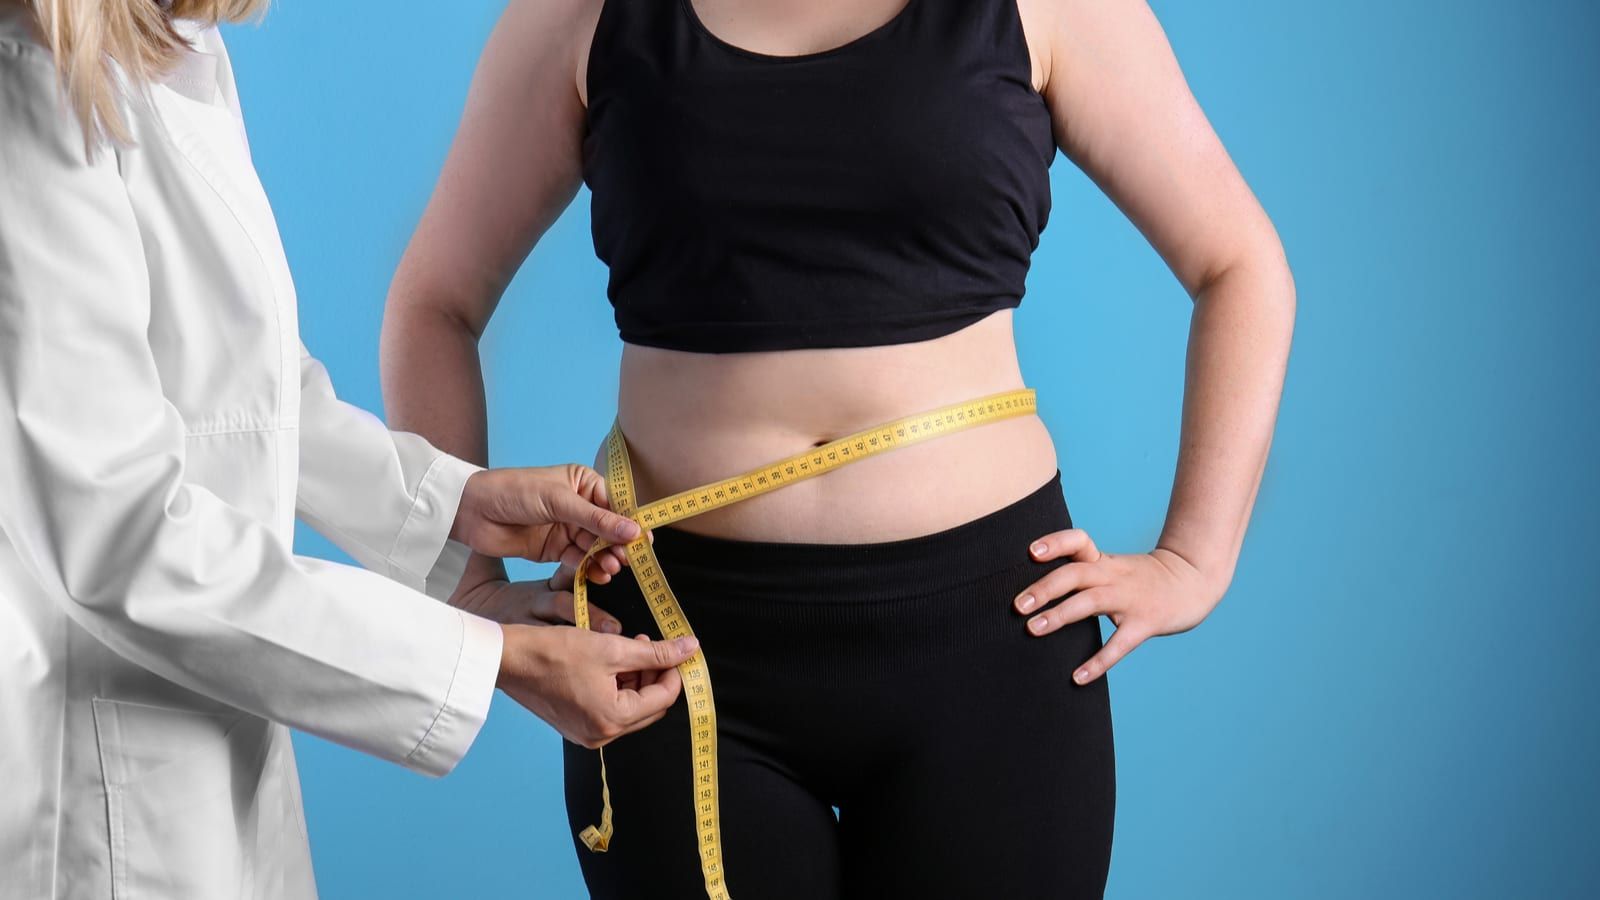 Shave Away The Pounds The Healthy Way With Medical Weight Loss